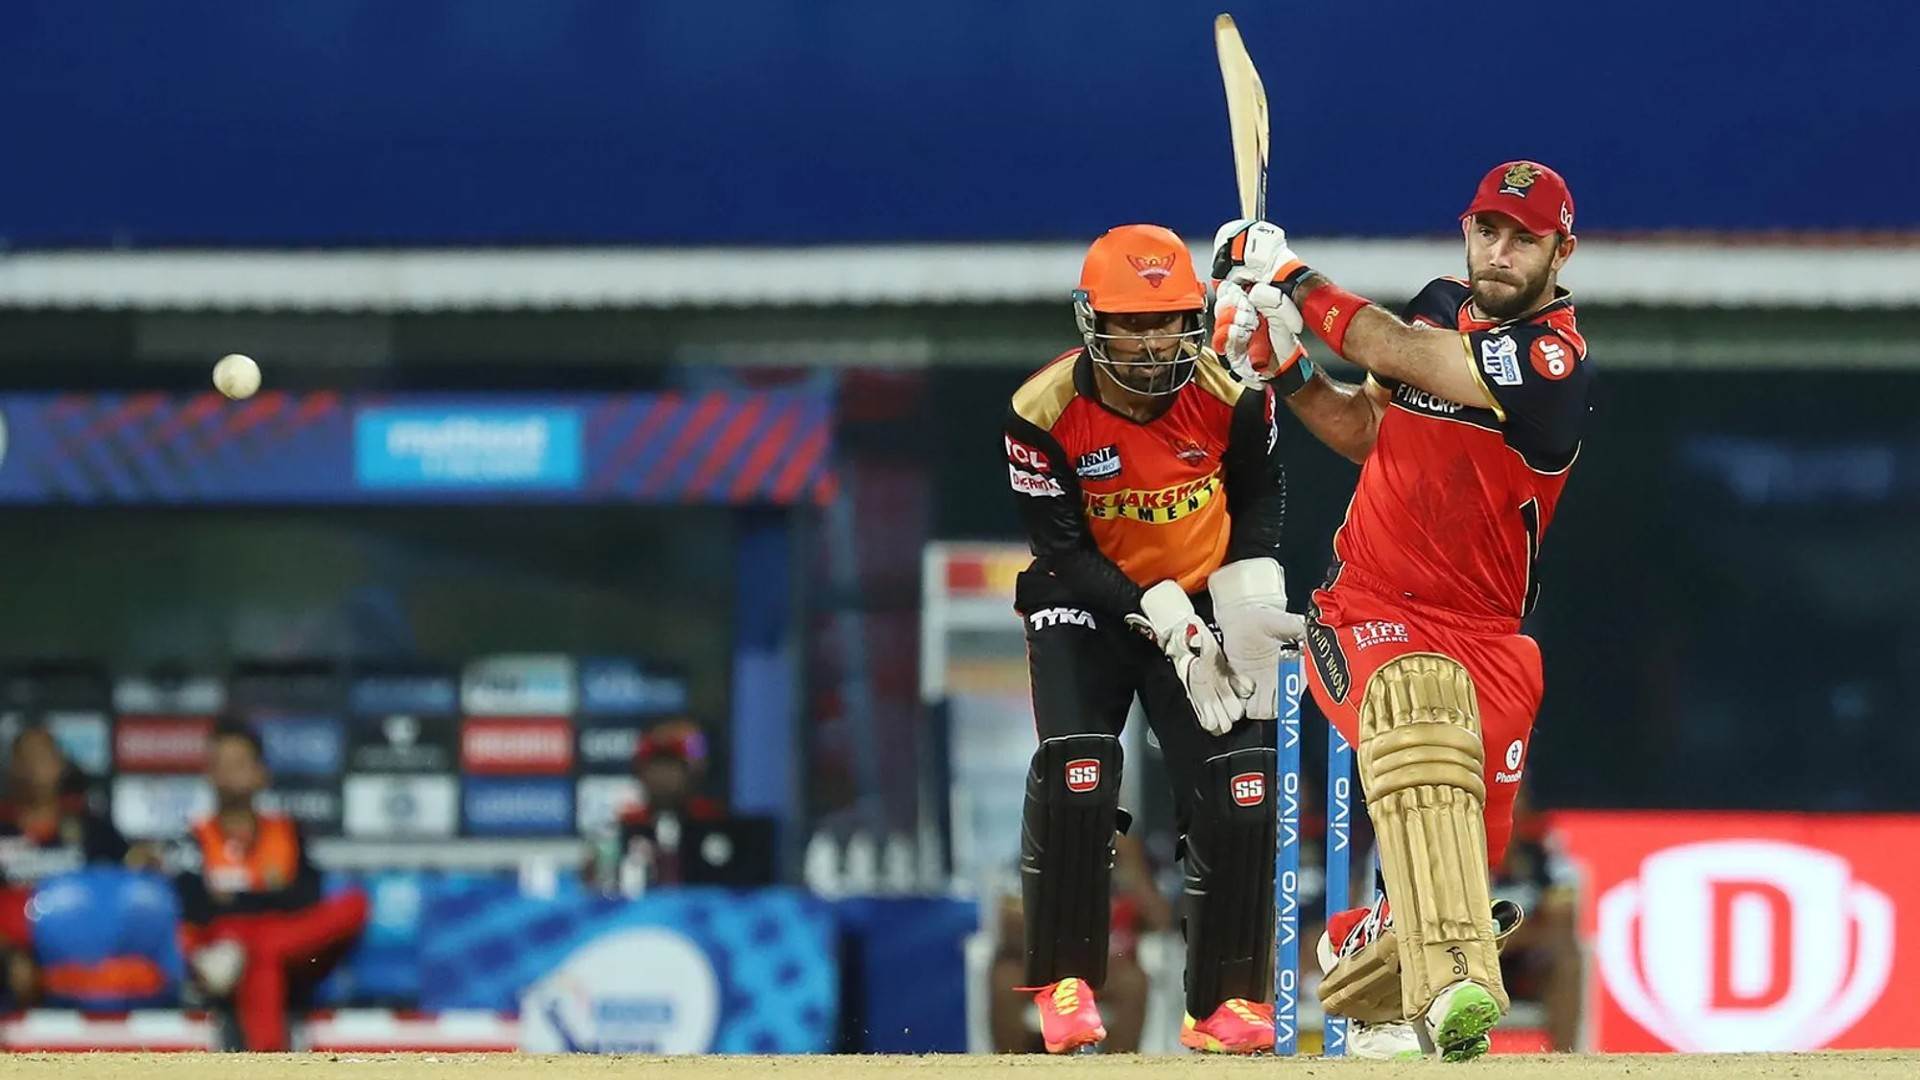 IPL 2021: Glenn Maxwell's innings was the difference for RCB